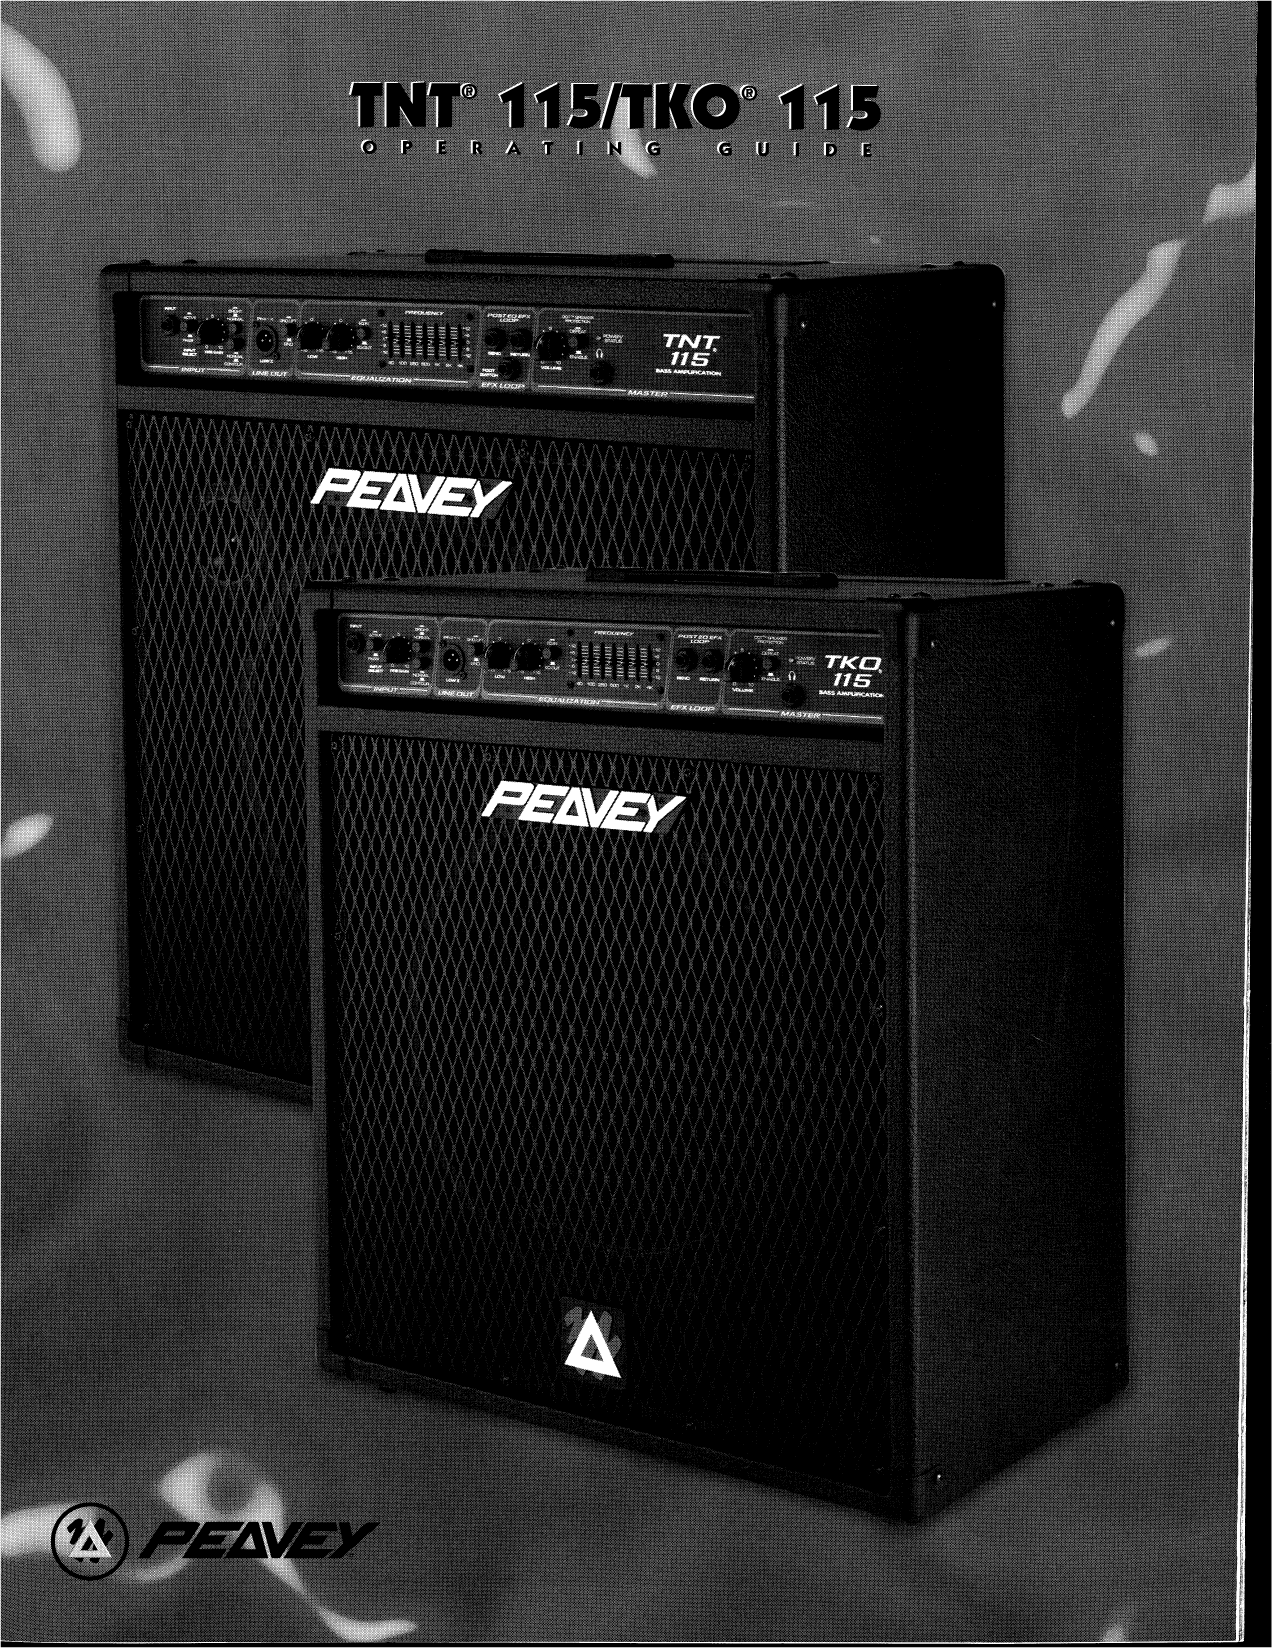 Download free pdf for Peavey TNT 115 Amp manual